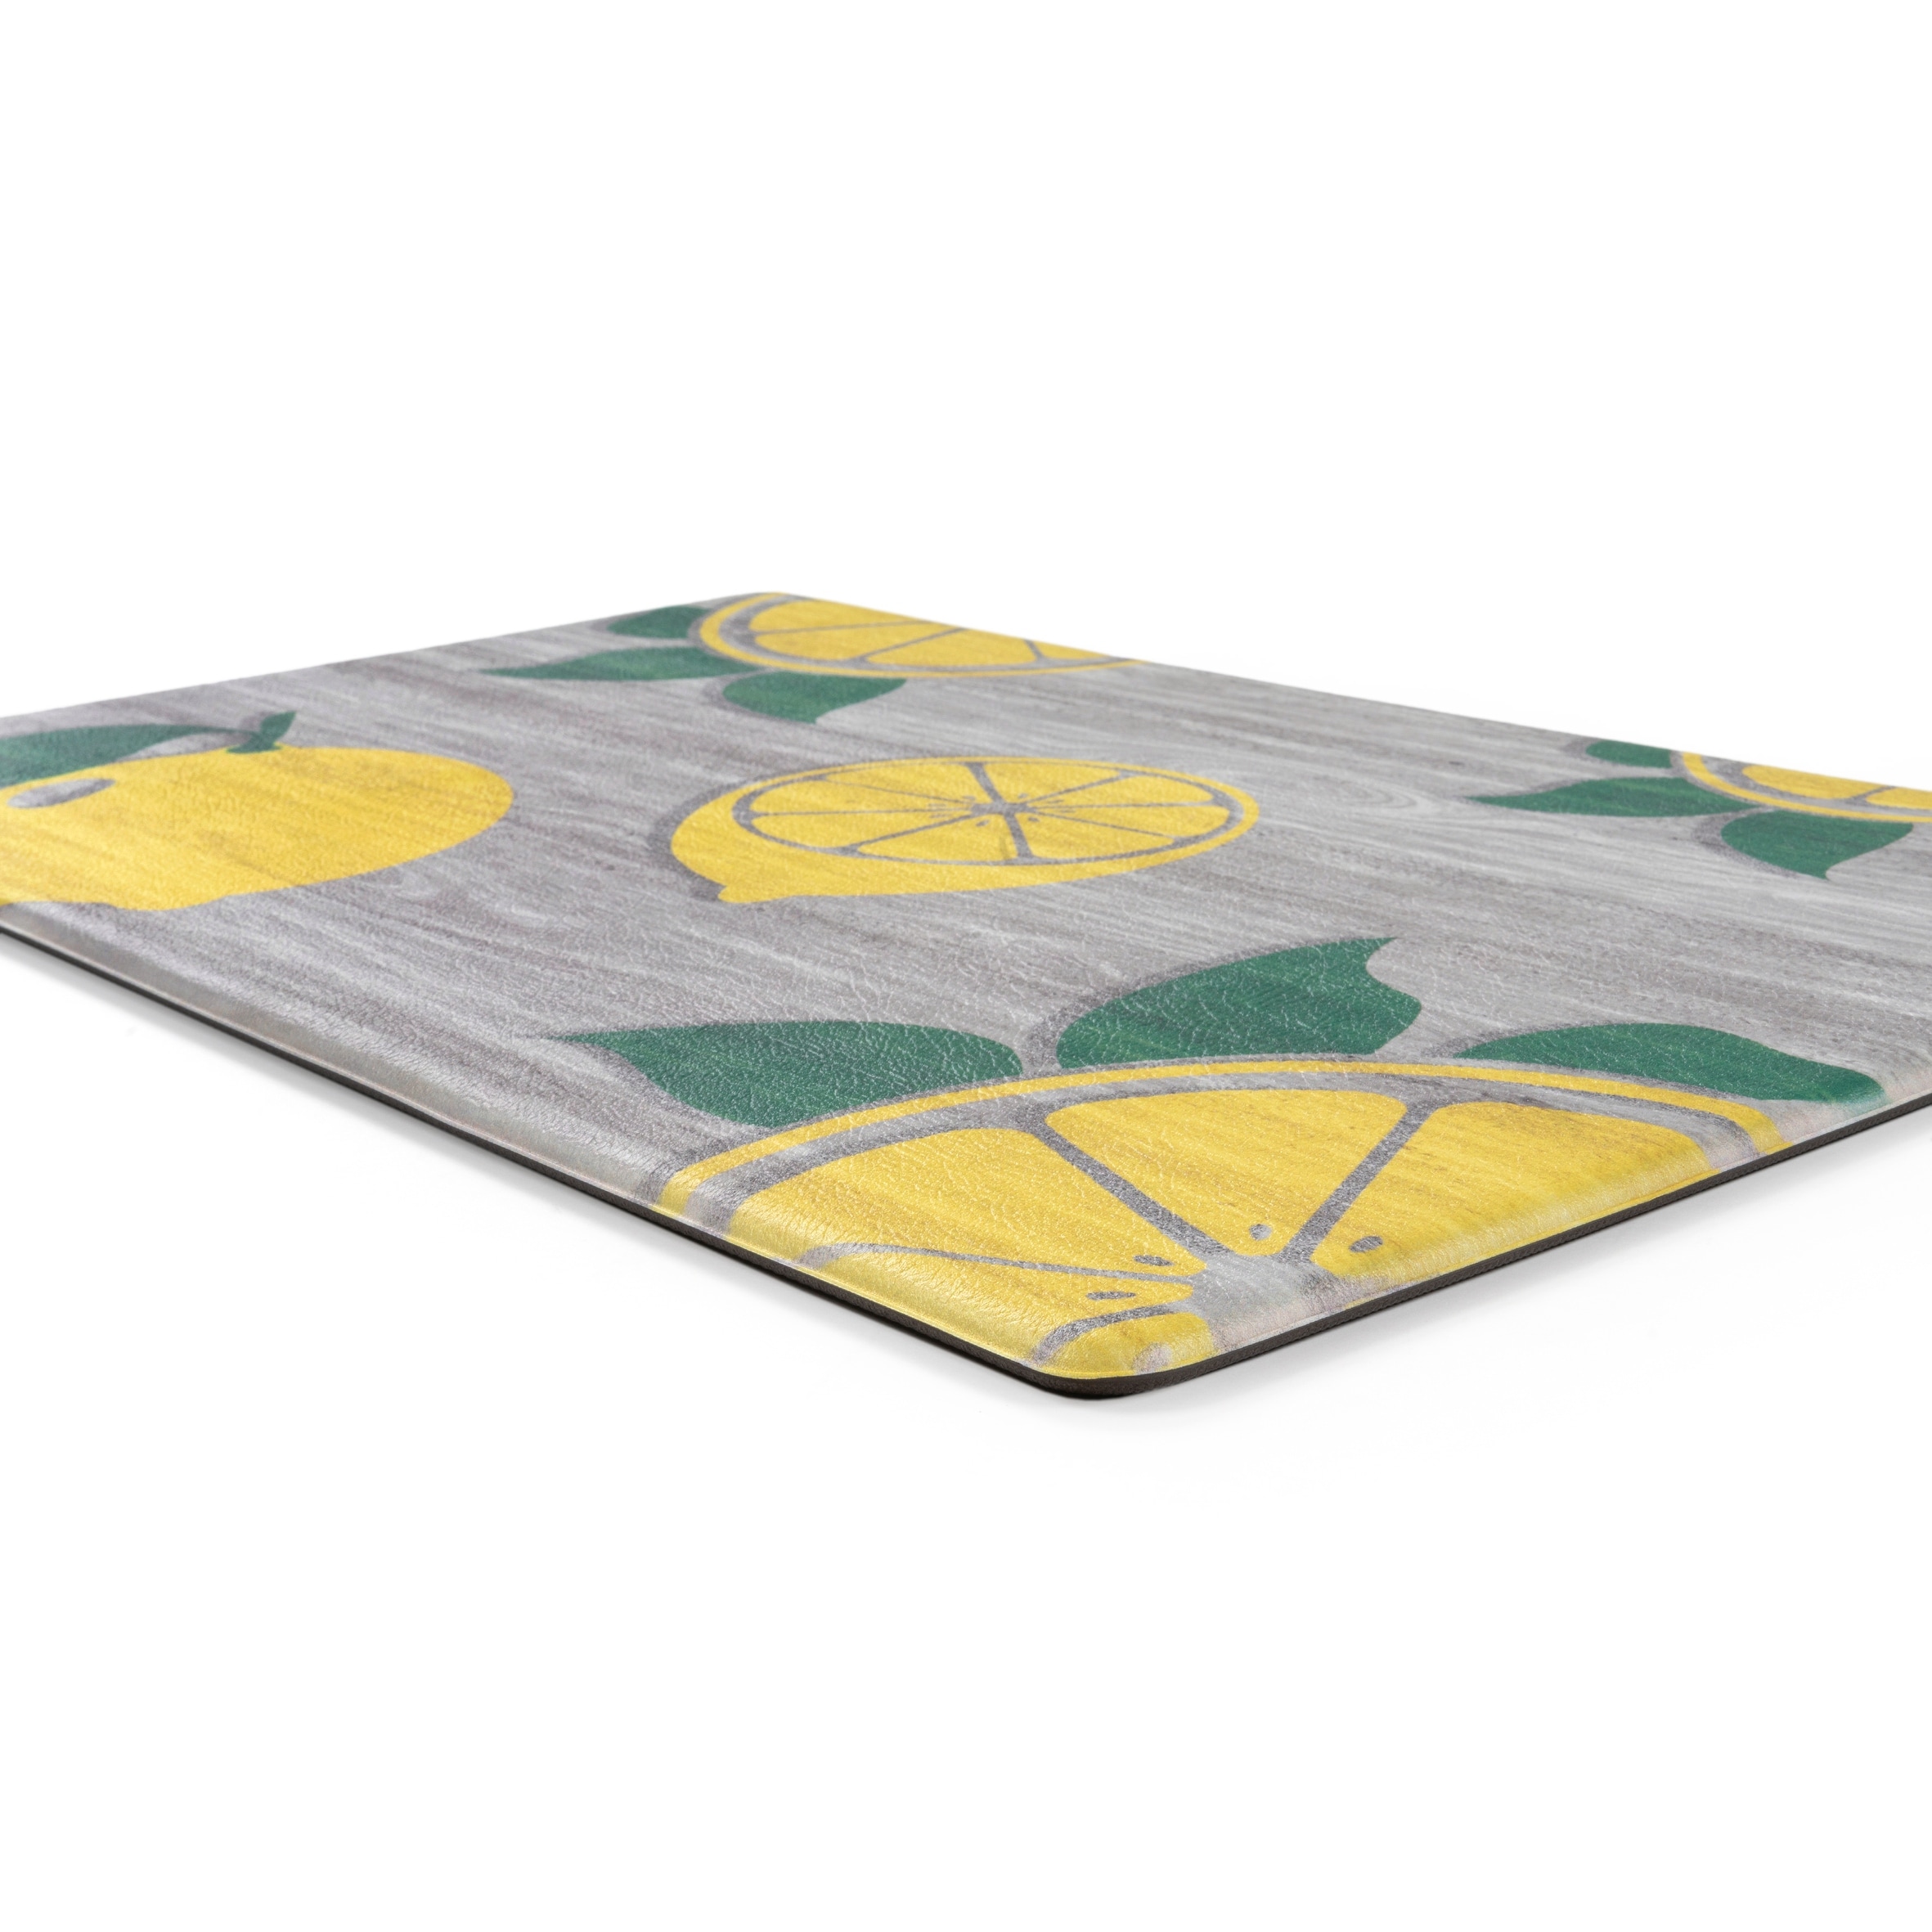 https://ak1.ostkcdn.com/images/products/is/images/direct/346c72fb5f9ad54b899d51fd3cd5d0b1679c4132/Lemon-Pattern-Anti-Fatigue-Standing-Mat.jpg